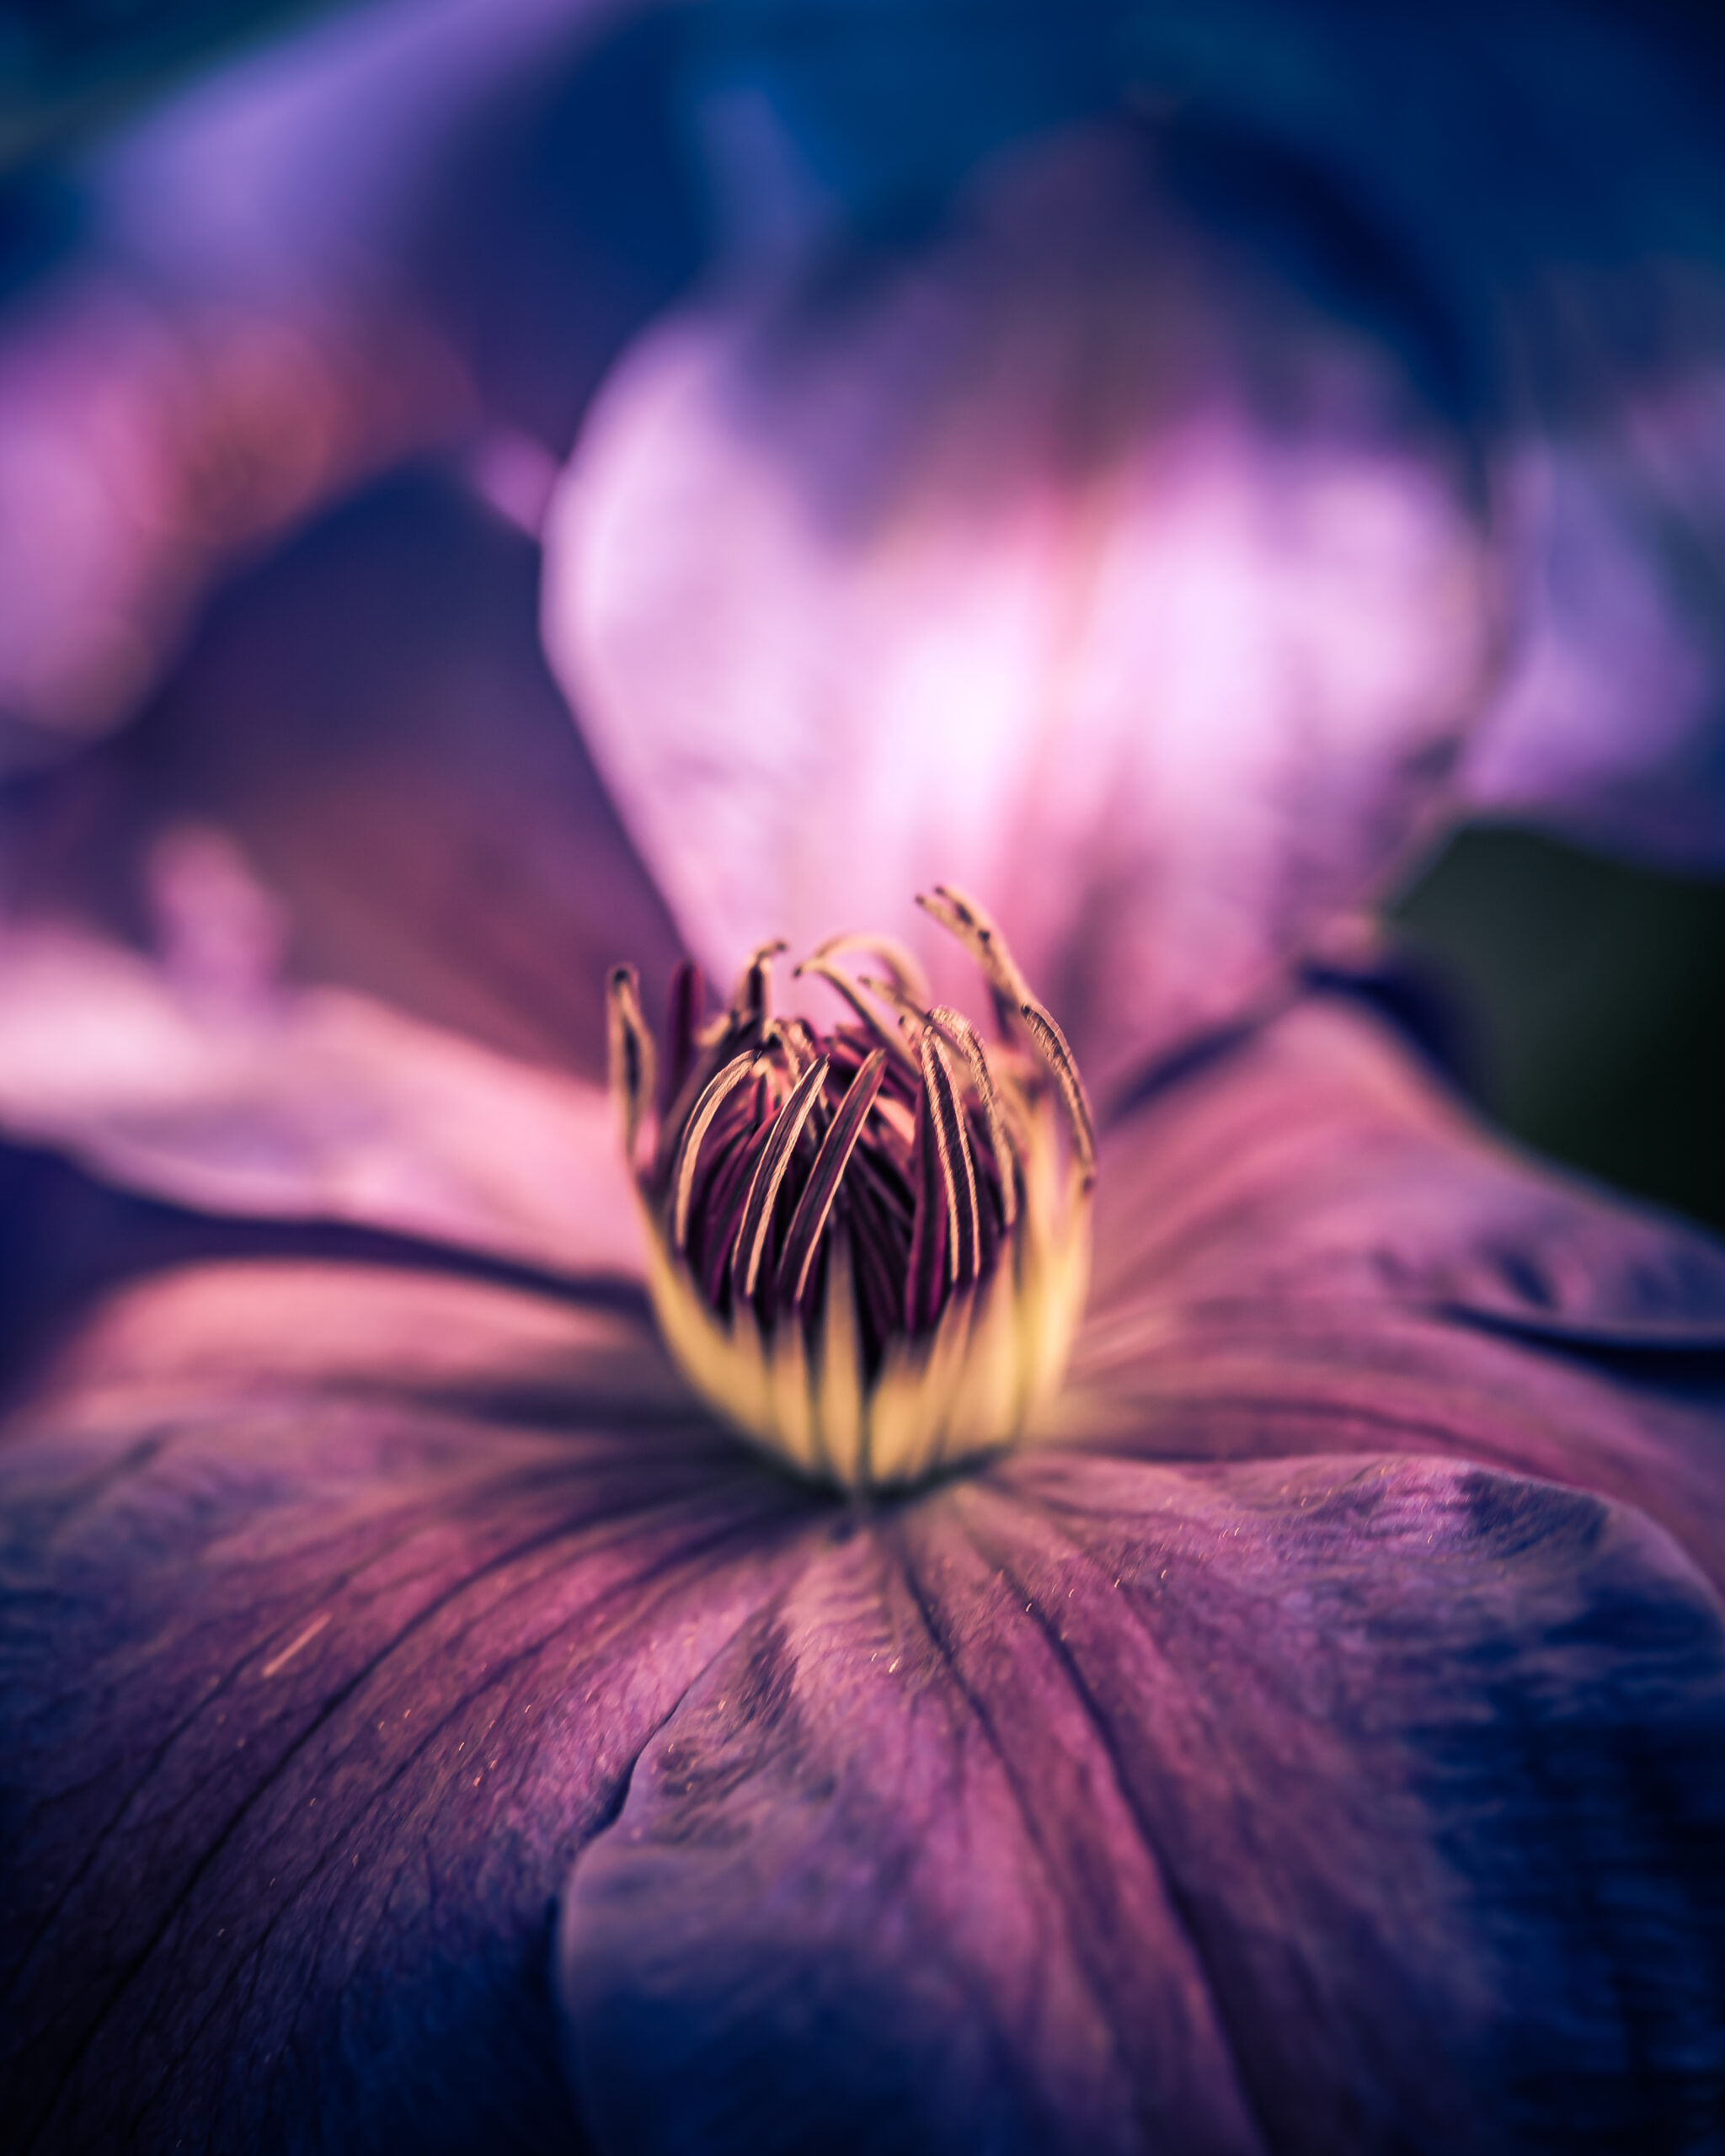 100mm vertical orientation macro photograph of a clematis blossom dusted with pollen.